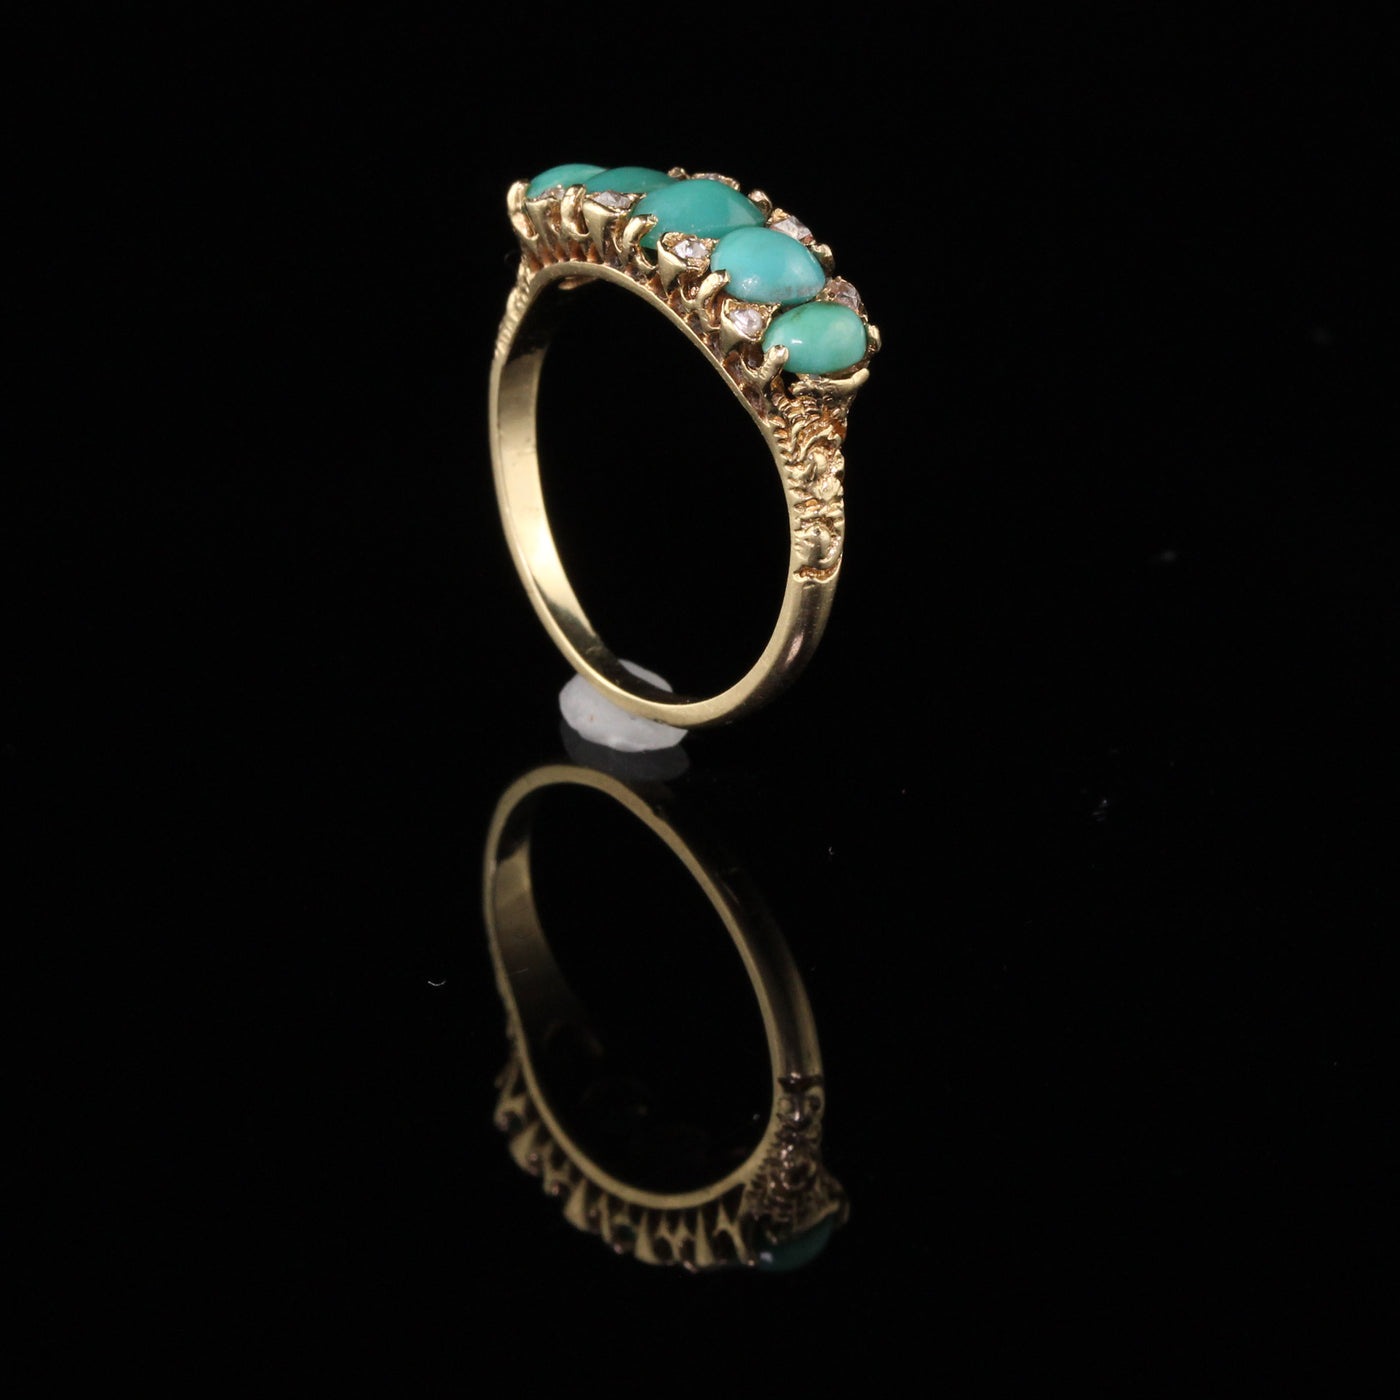 Antique Victorian 14K Yellow Gold Diamond and Turquoise Ring